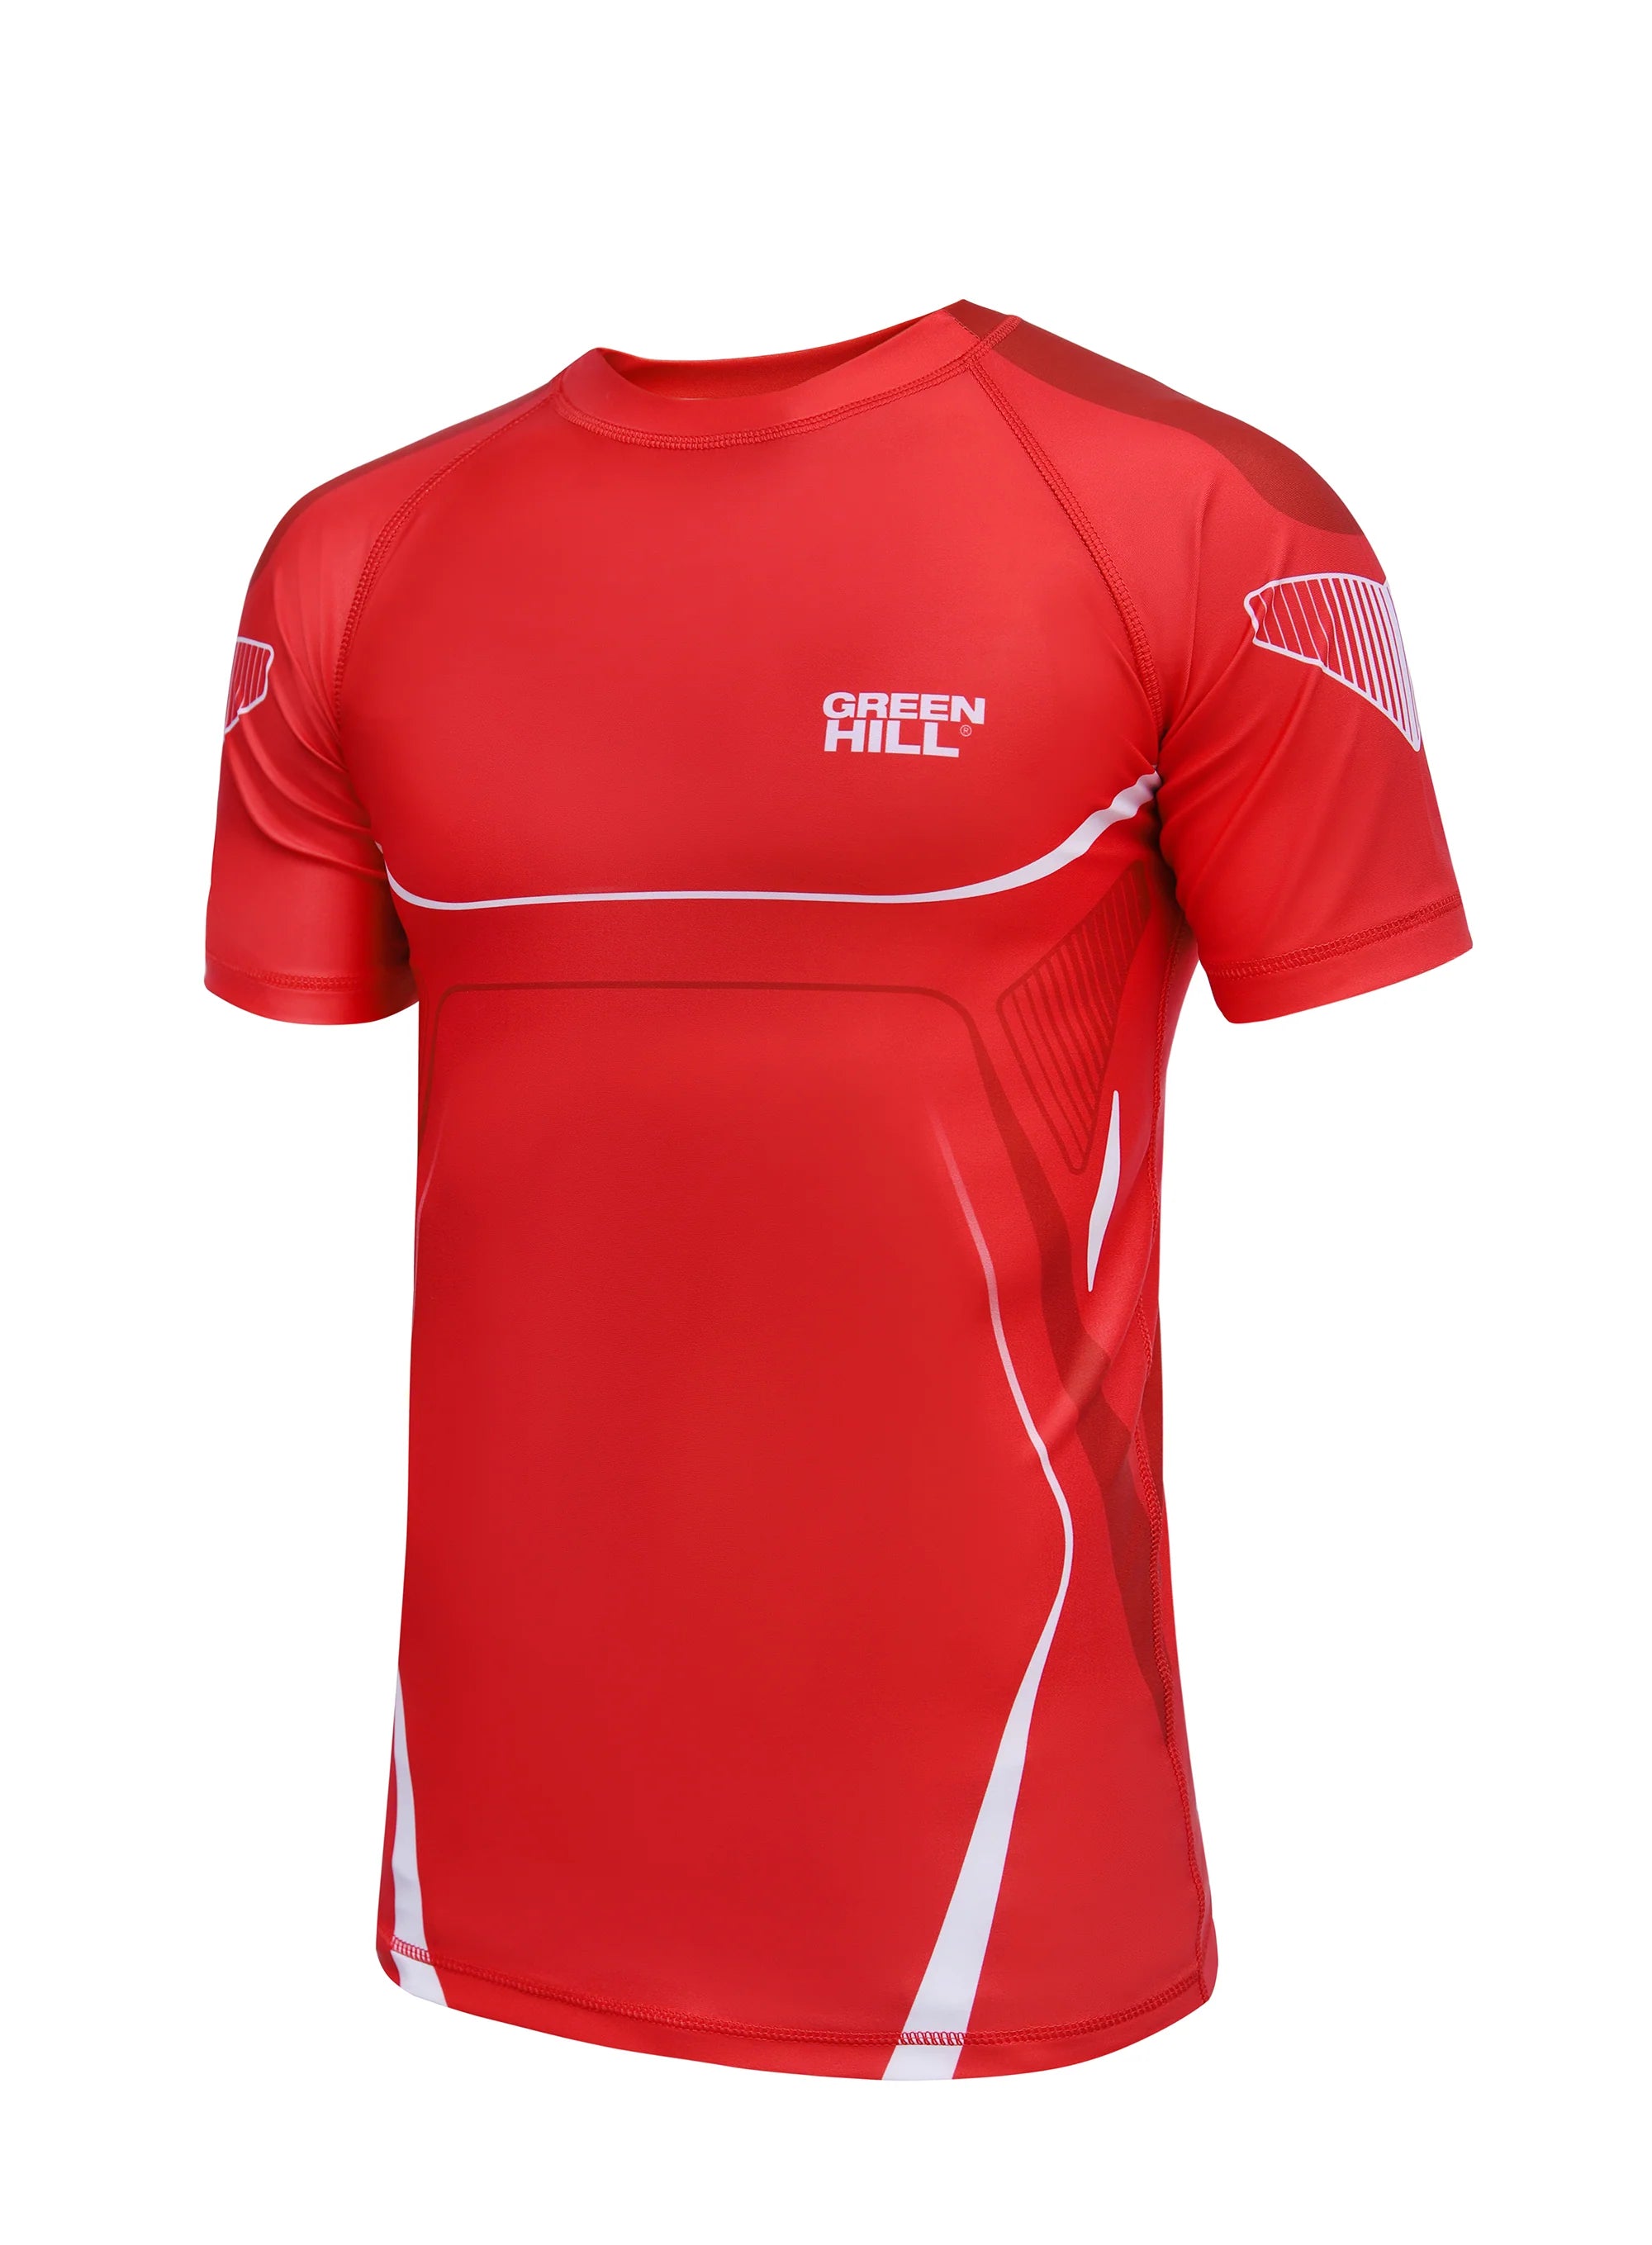 GREEN HILL IMMAF APPROVED RASH GUARD RED 2023